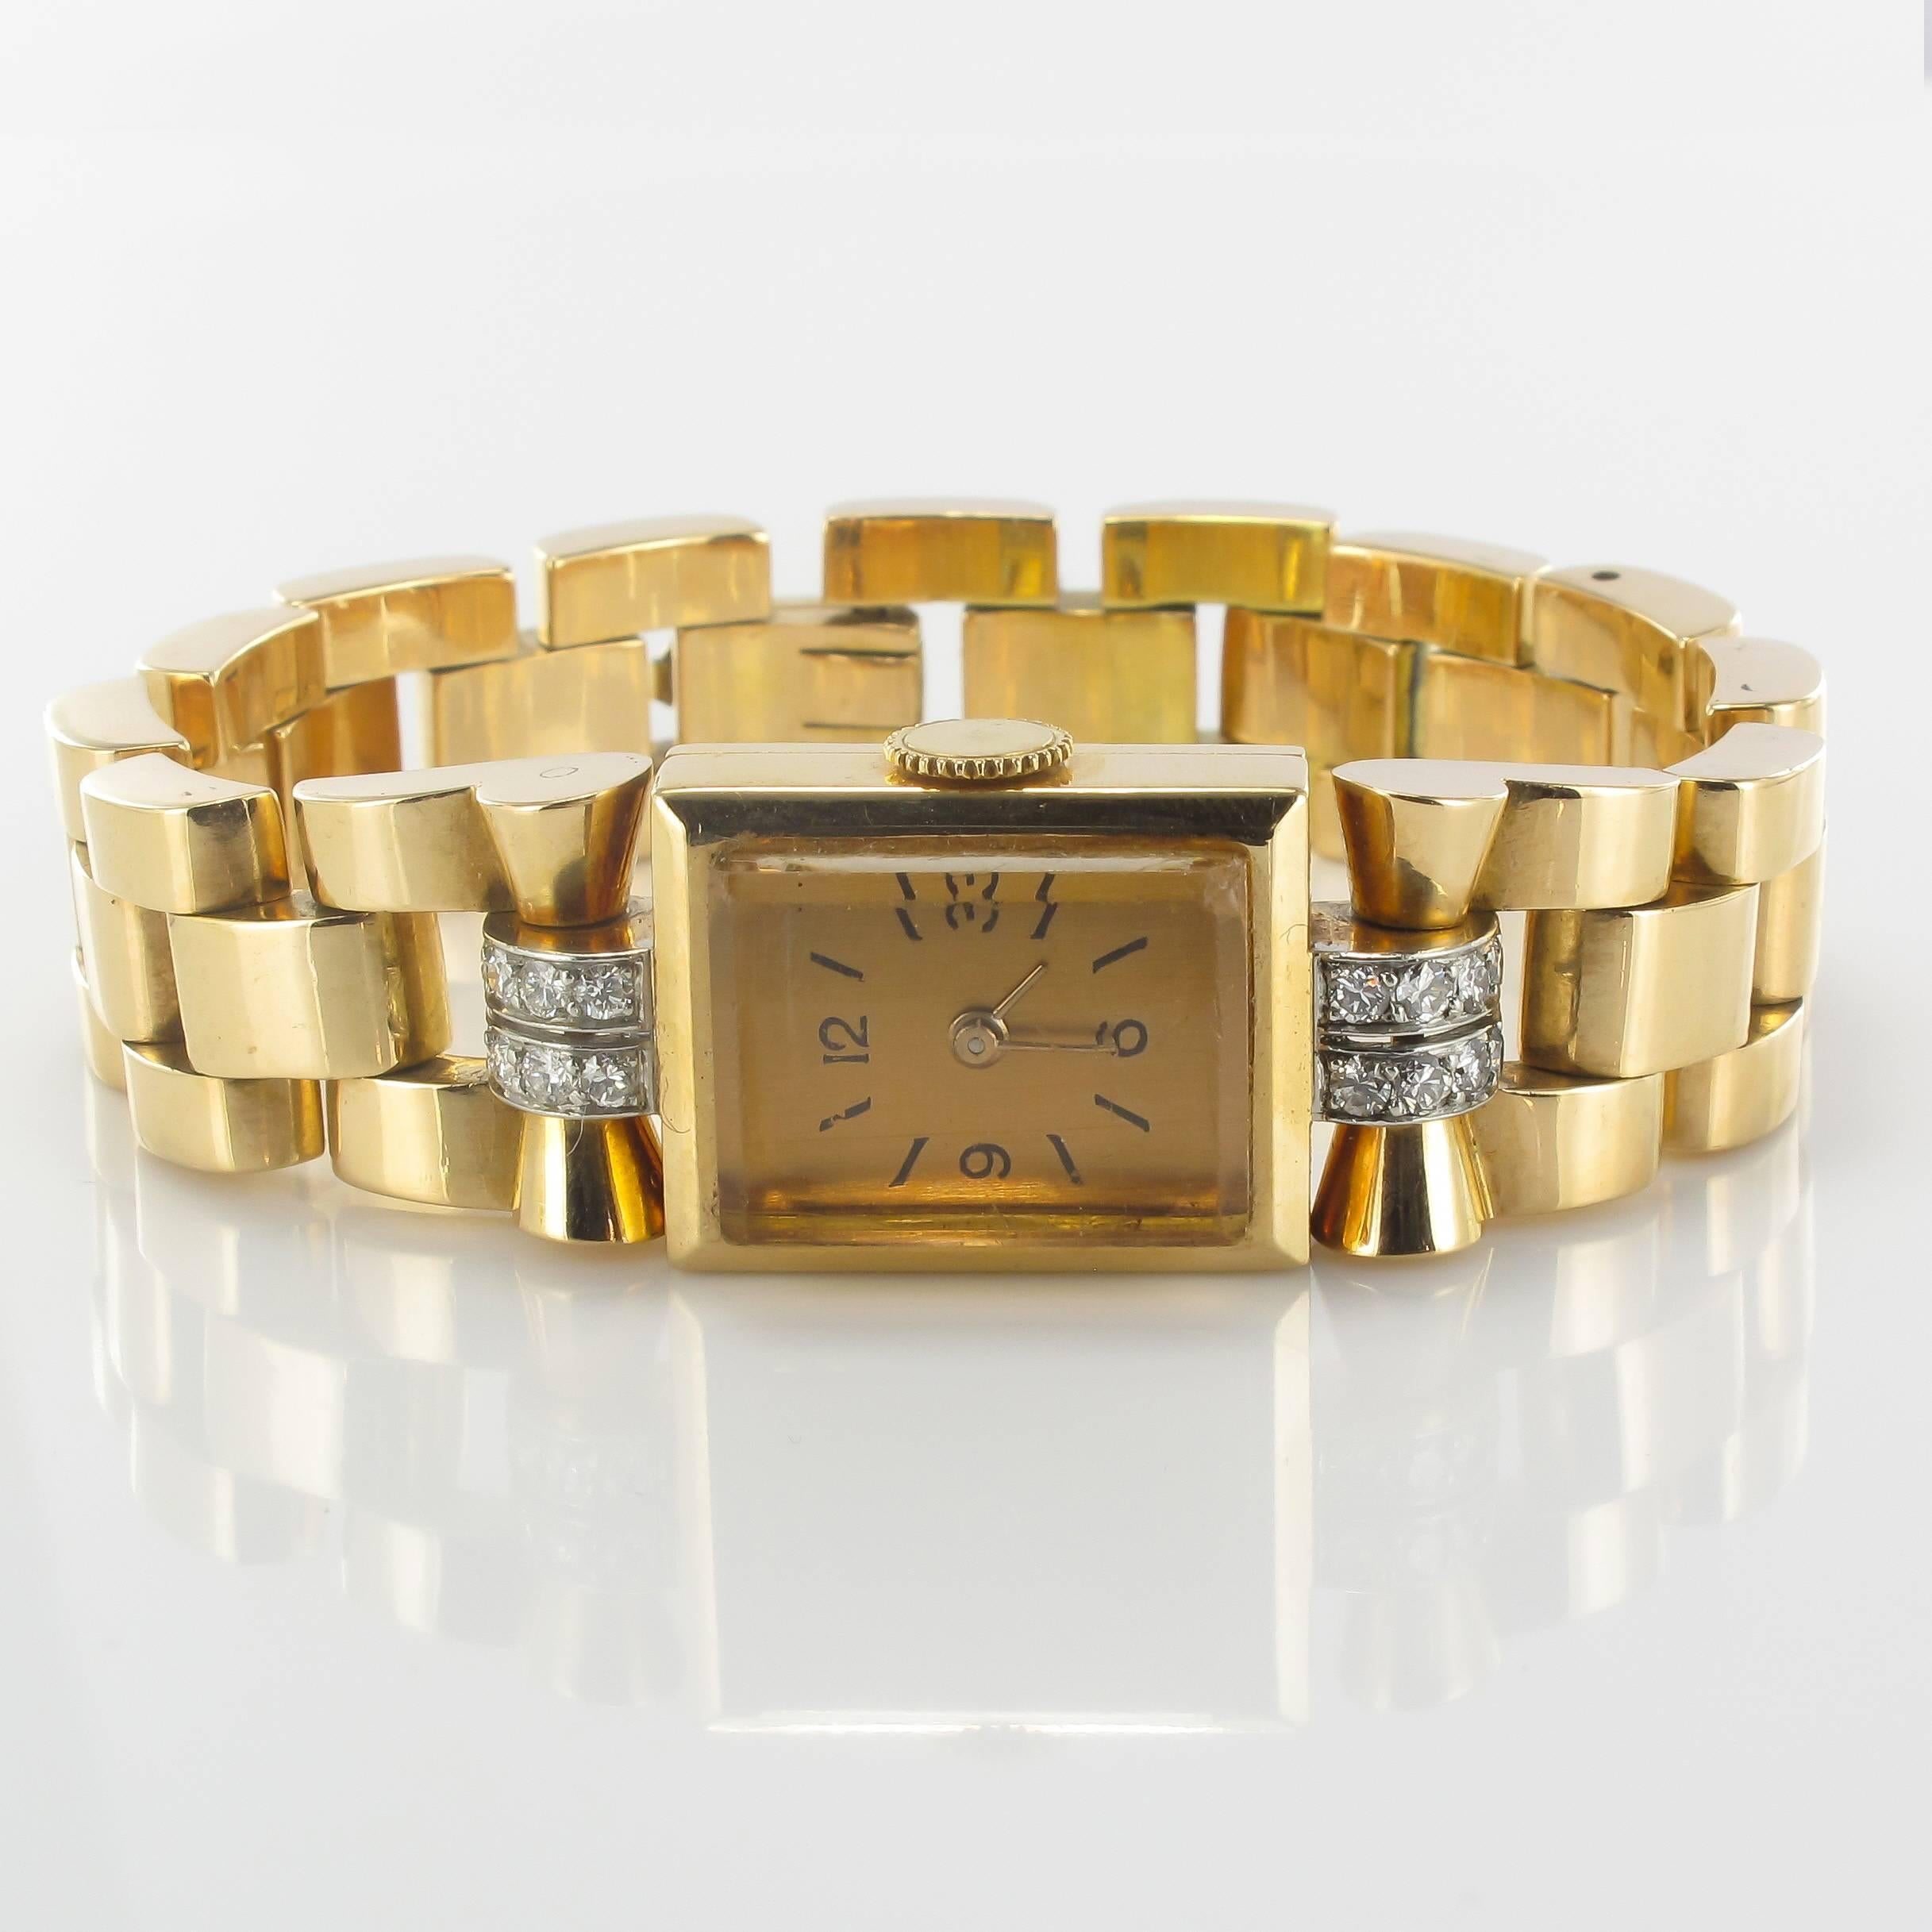 Ladies watch.
Bracelet and rectangular case in 18 carats yellow gold.
Background of the case of gold color.
Overall length: 18,3 cm, Width at the widest: 1,8 cm, Thickness at the widest: 1 cm approx.
Total weight: approximately 63.7 g.
2 x 2 lines